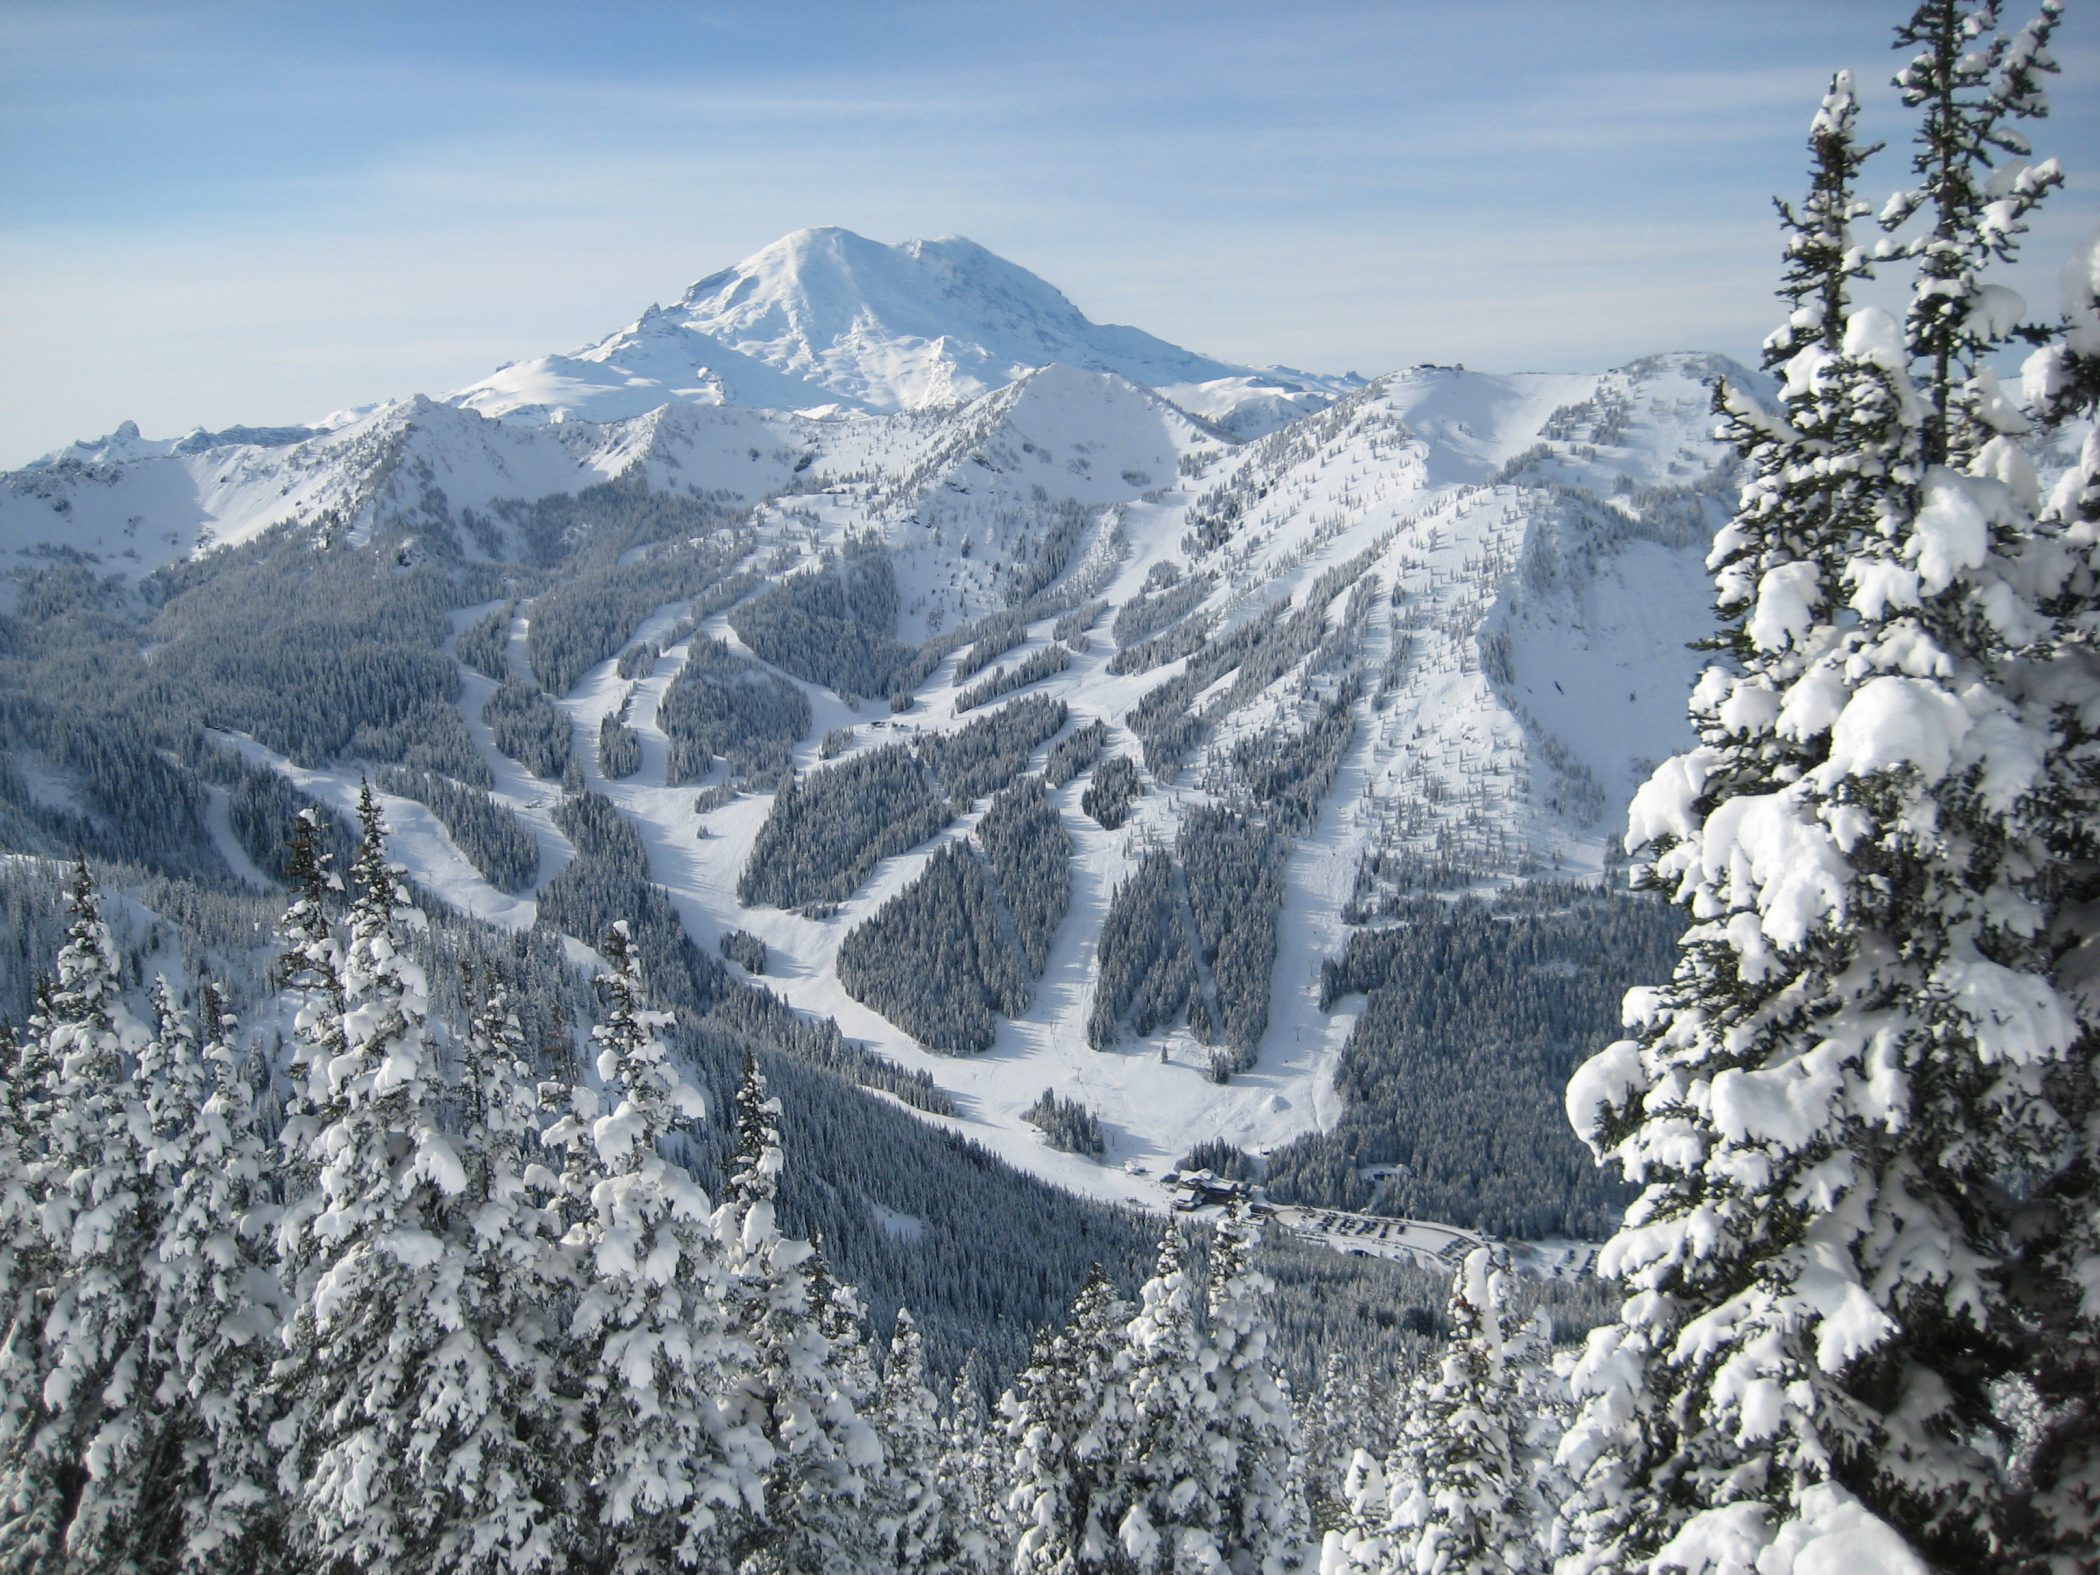 Crystal Mountain Resort, last acquisition of Alterra Mountain Company - to be enjoyed by IKON Pass holders. 